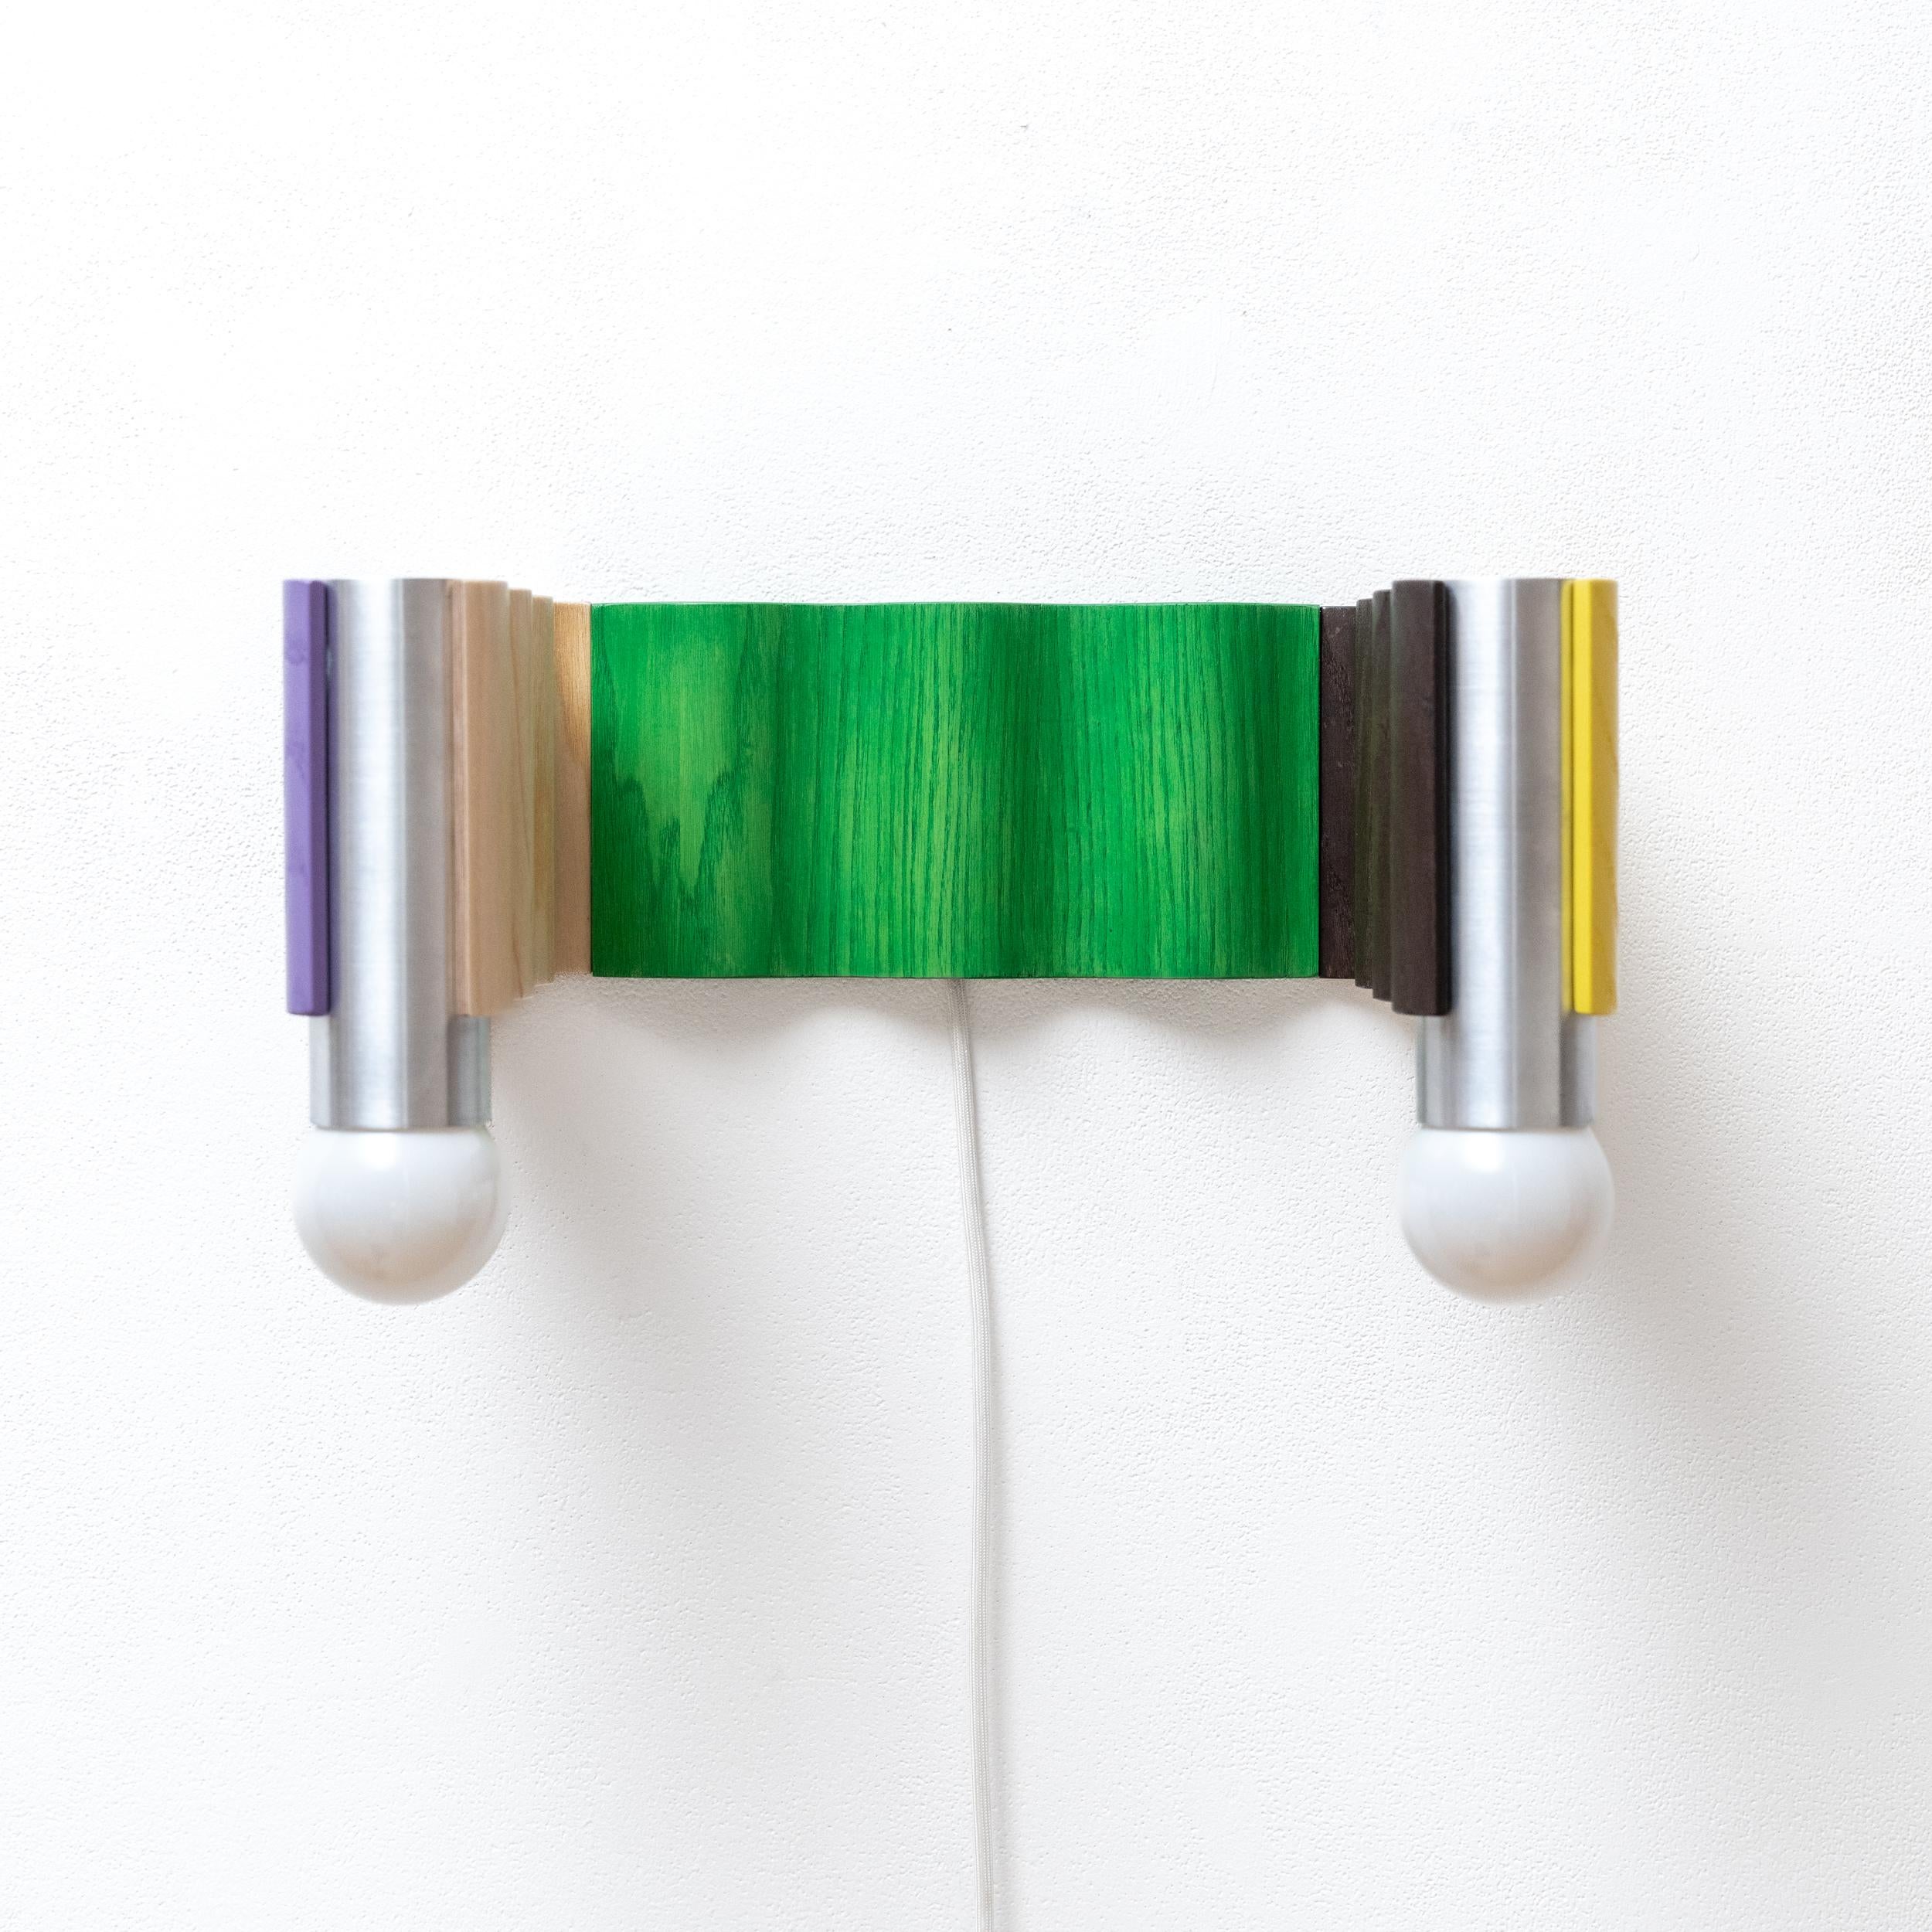 Multi-coloured double sconce made from ash veneered plywood (painted purple, clear coated, stained green, brown painted, yellow painted) and brushed aluminium tubes. Designed for Fels's exhibition 